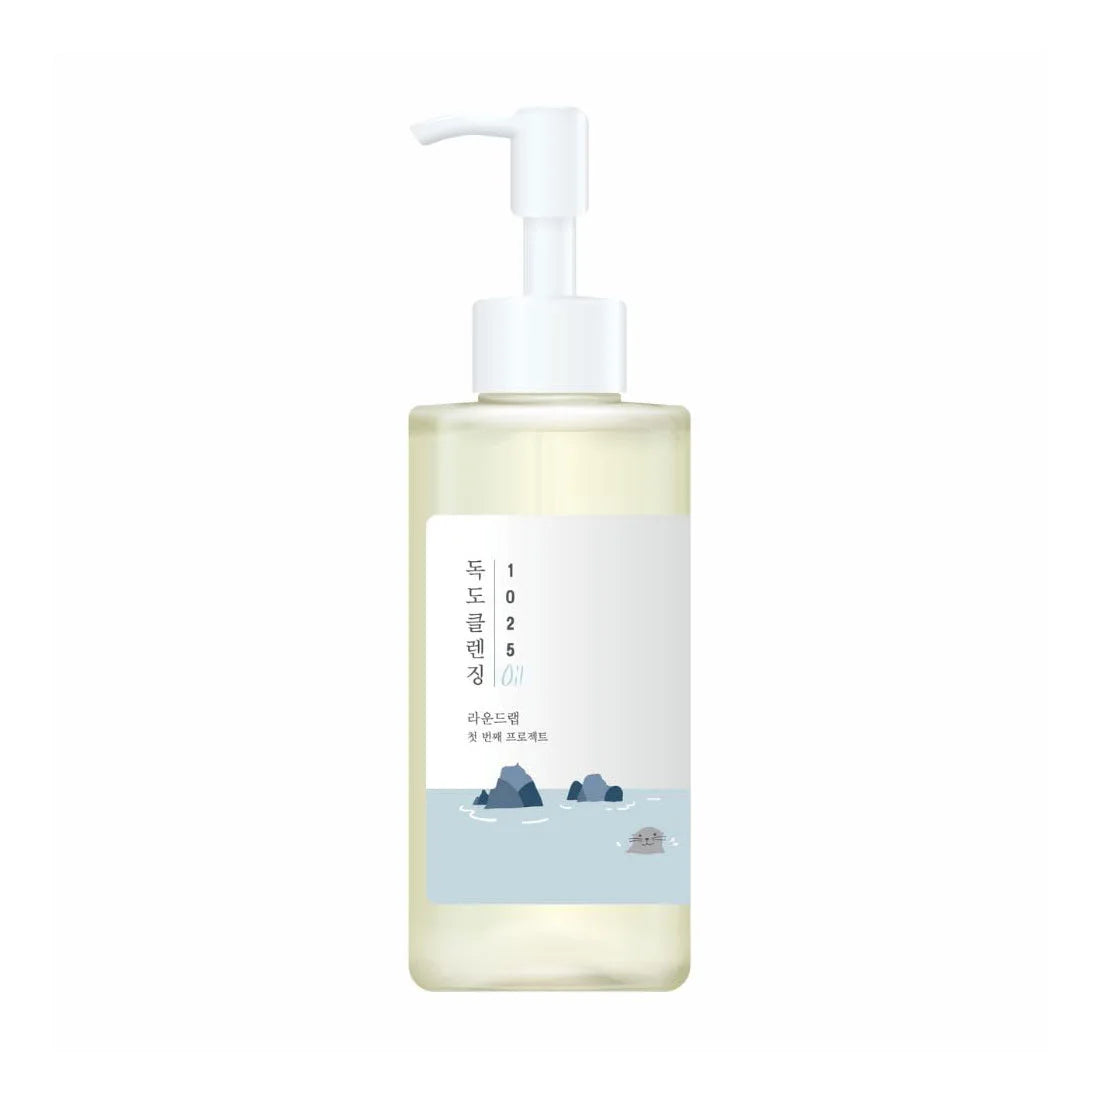 Round Lab 1025 Dokdo Cleansing Oil best gentle moisturizing hypoallergenic Korean makeup remover face cleansing for dry dull sensitive oily combination acne prone skin types K Beauty World 